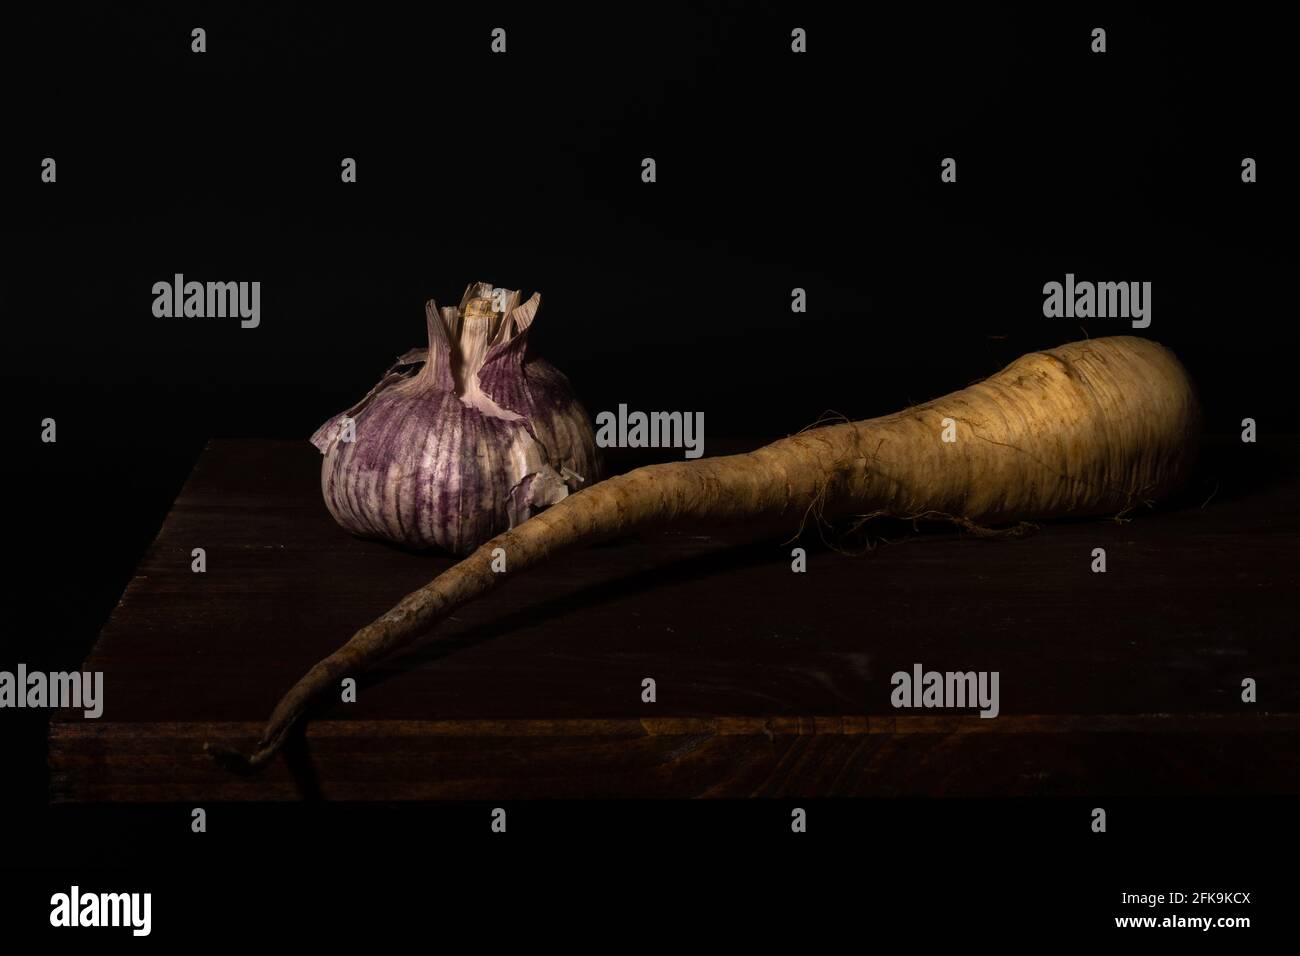 A Stillife of garlic and a parsnip on a wooden table against a dark background Stock Photo